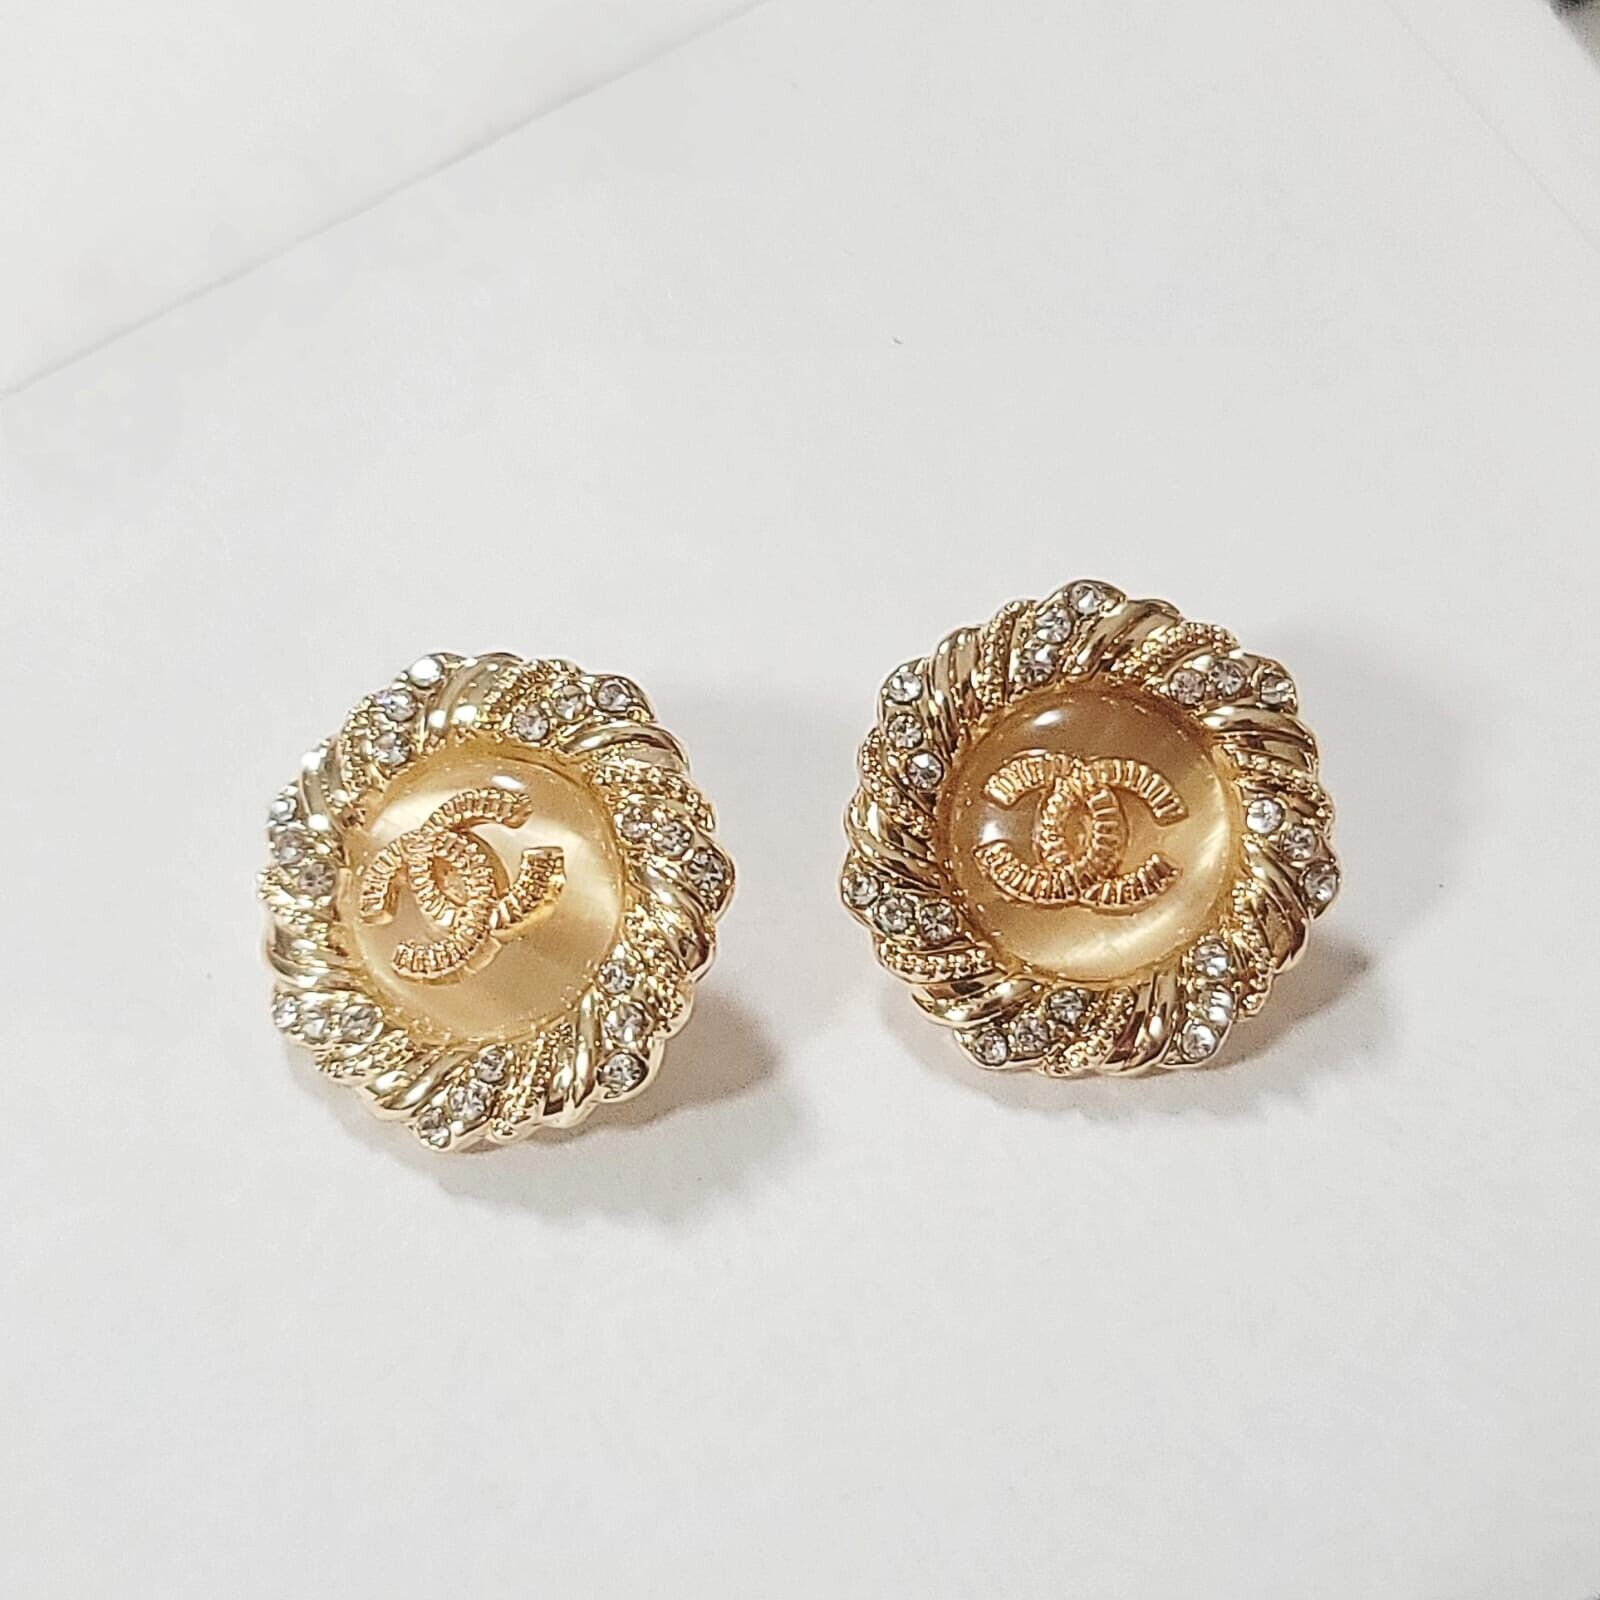 2pc Chanel Buttons 18mm Gold Tone